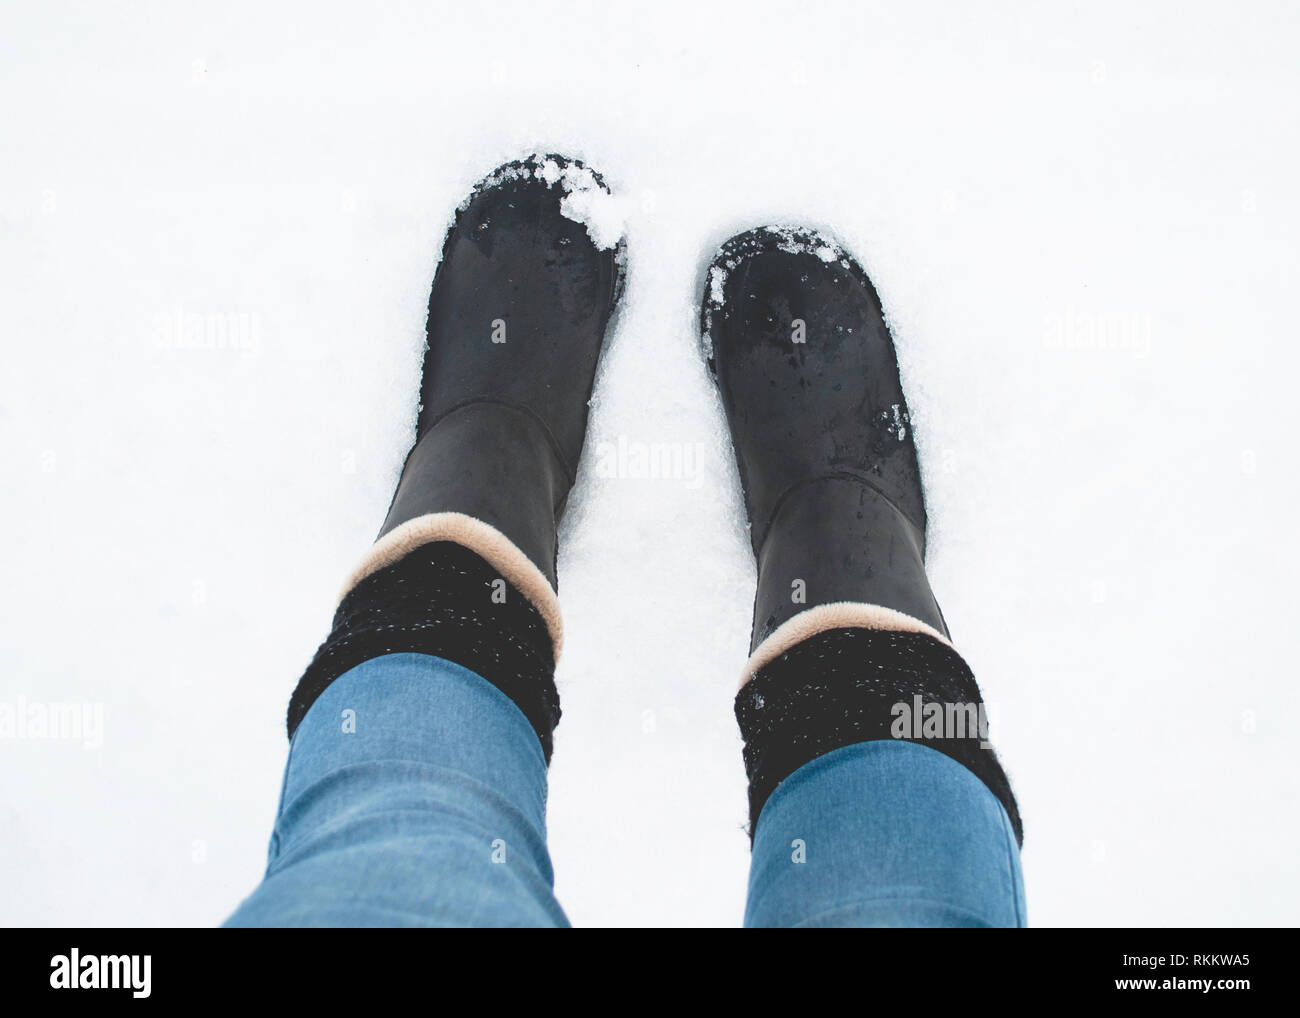 my boots in the snow Stock Photo